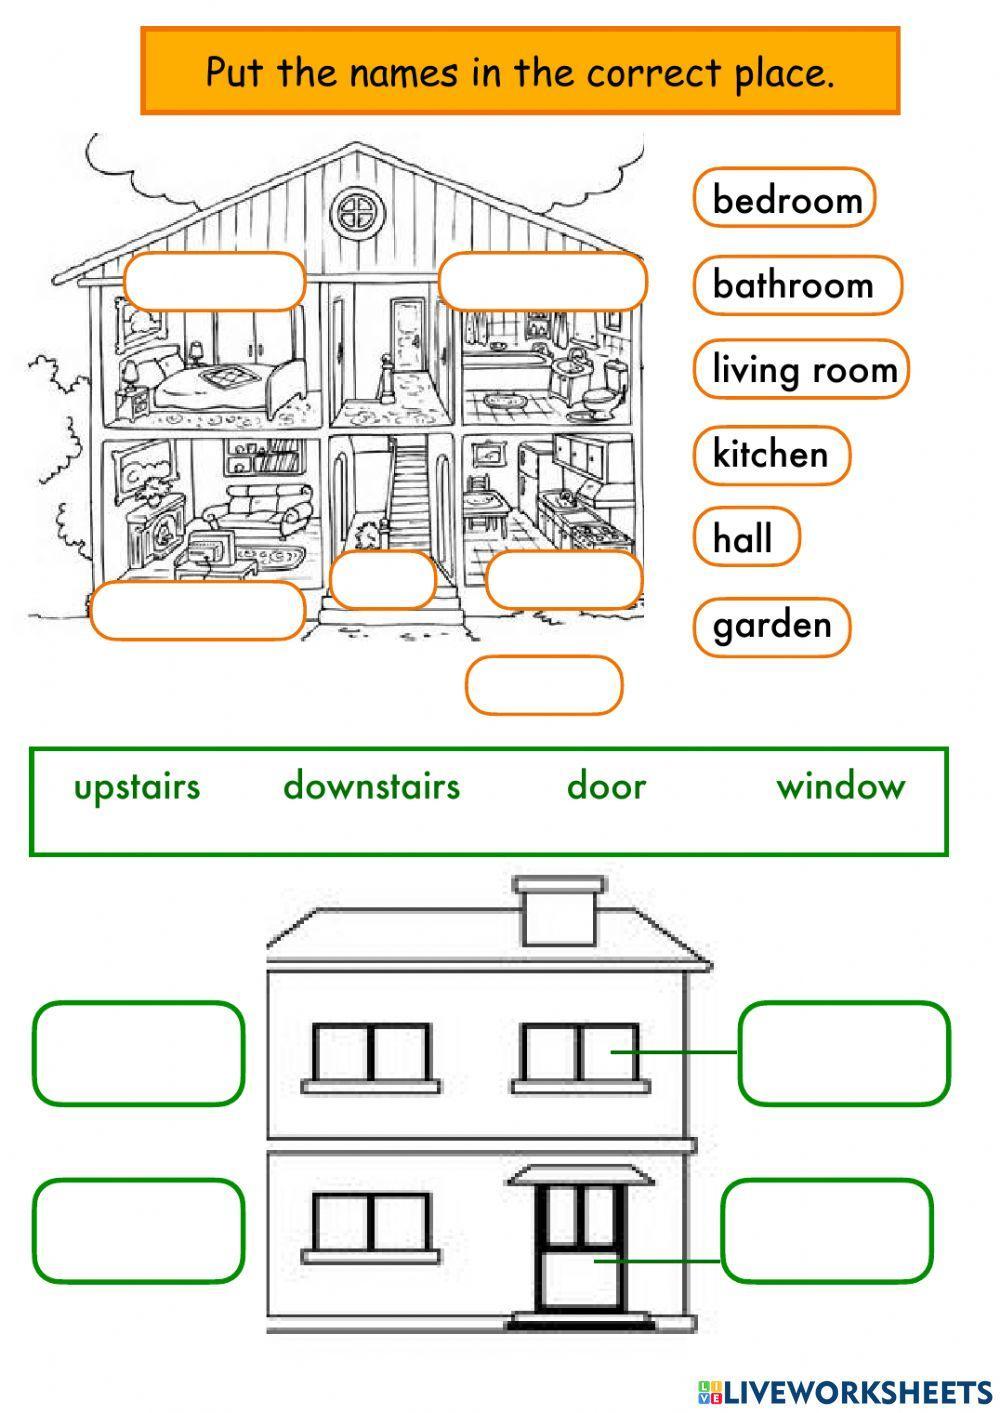 Types of house in Britain